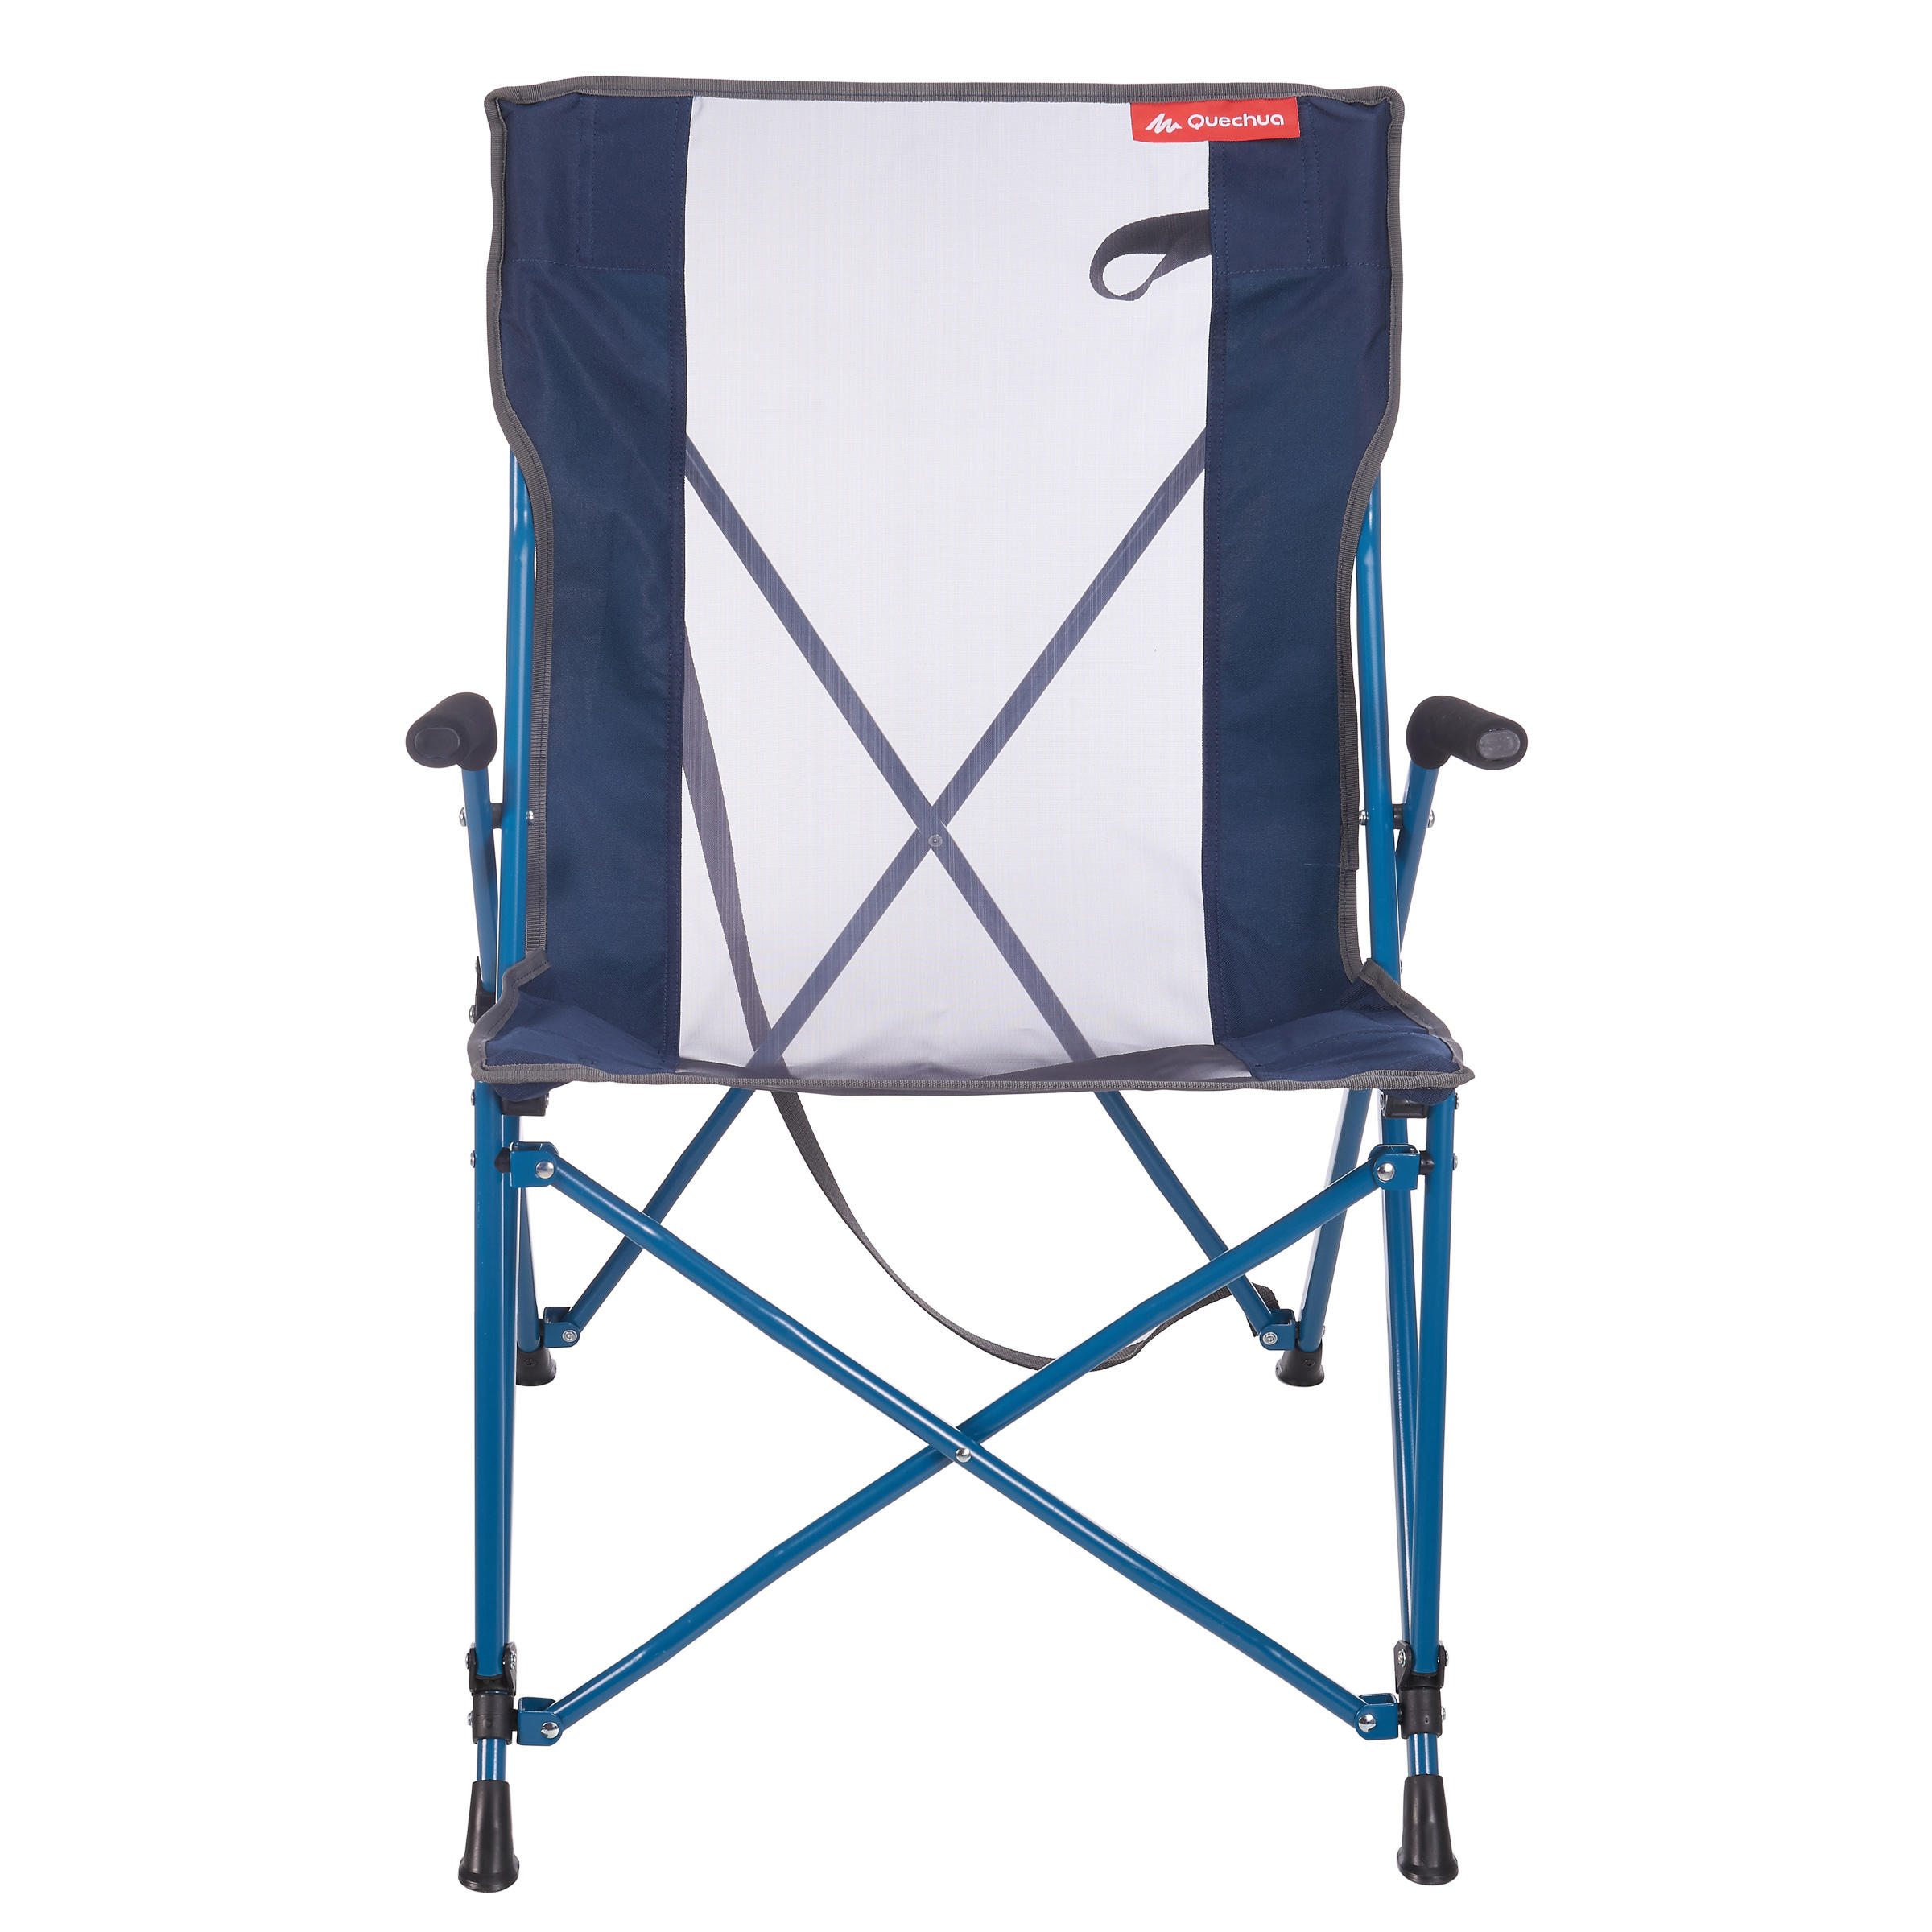 COMFORT CHAIR FOR CAMPING - BLUE 2/10